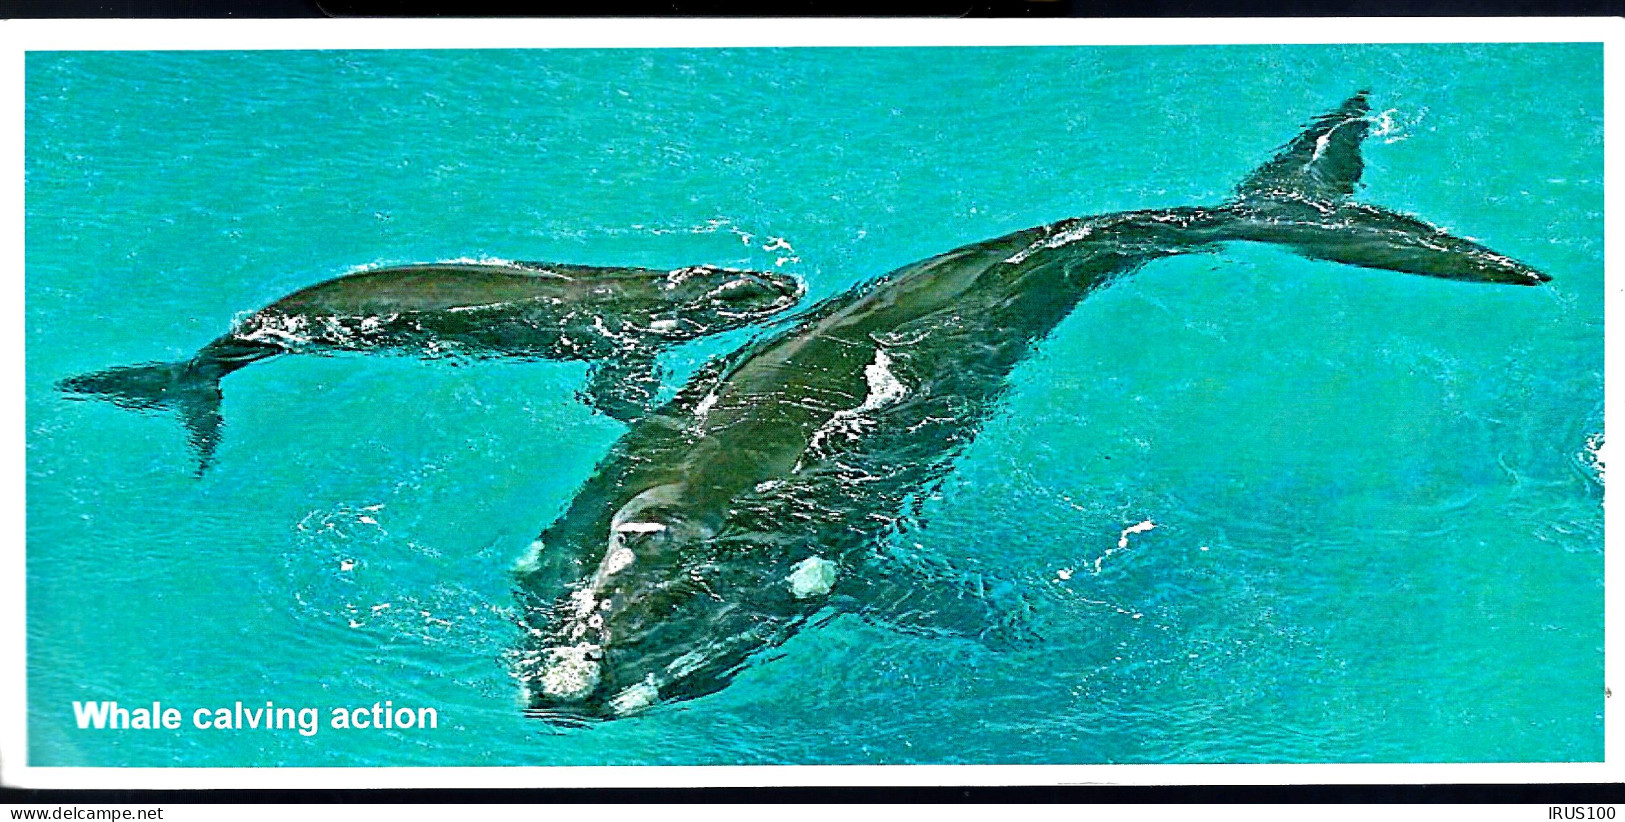 BALEINES - ROSS DEPENDENCY - THE COLDEST PLACE ON EARTH - WHALE COLVING ACTION - Whales